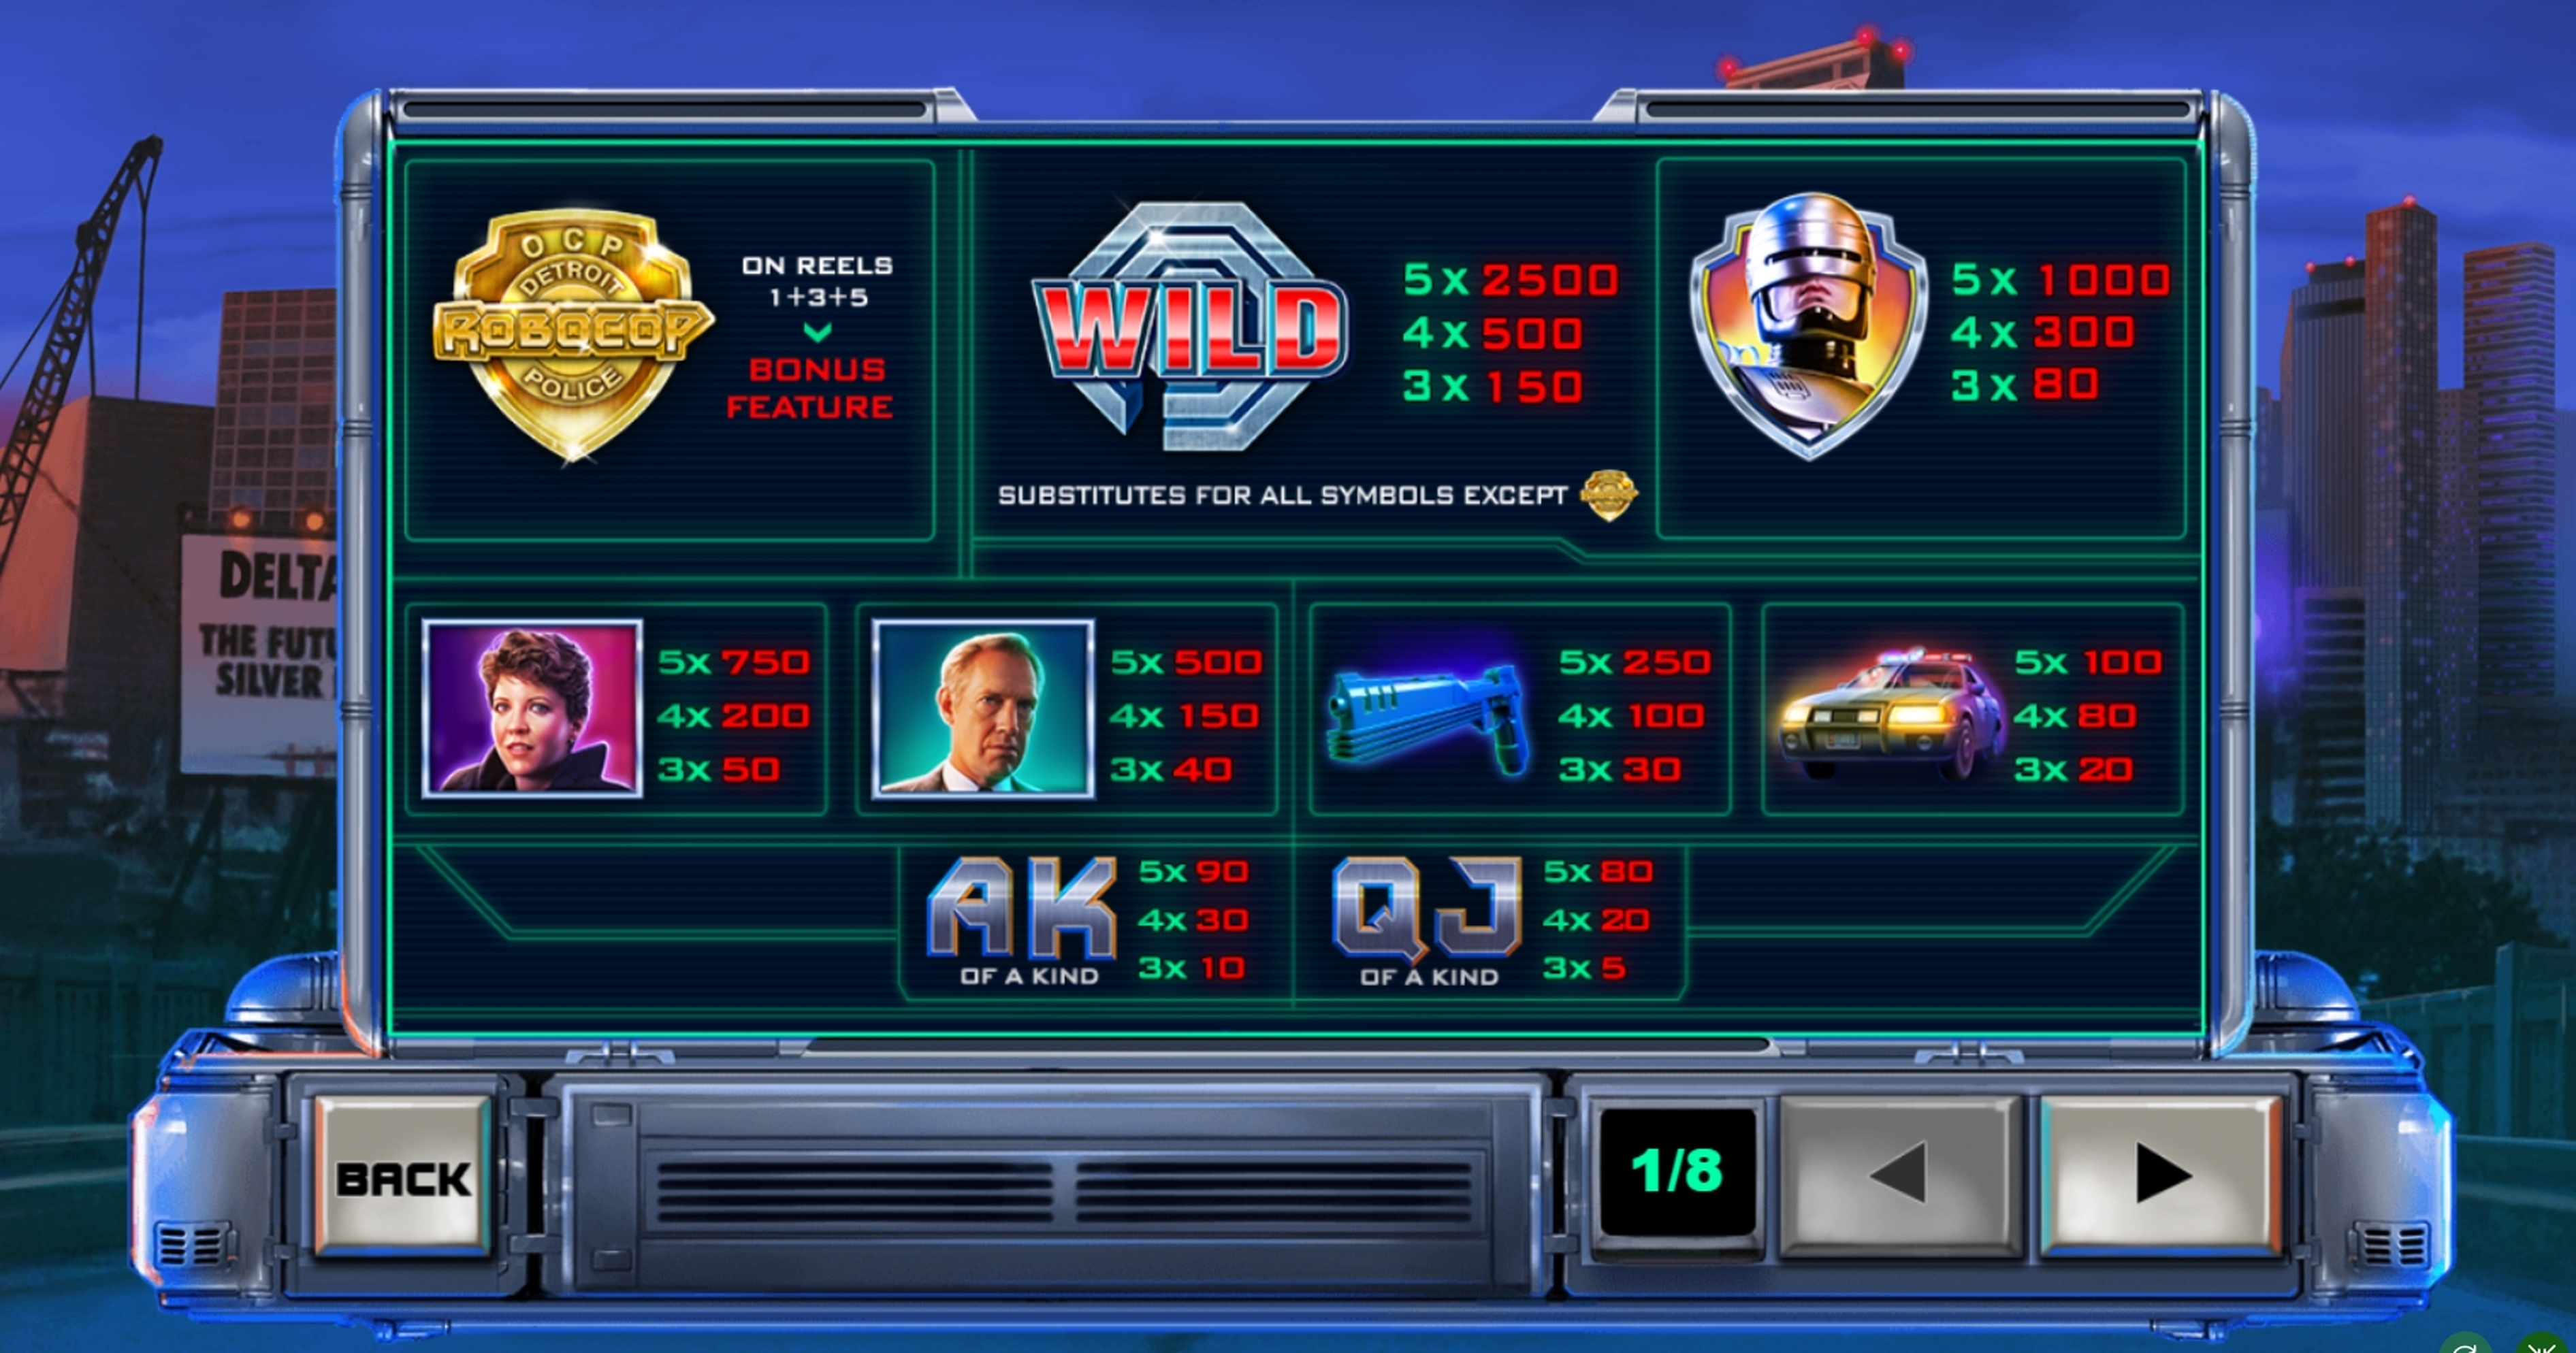 Info of RoboCop Slot Game by Playtech